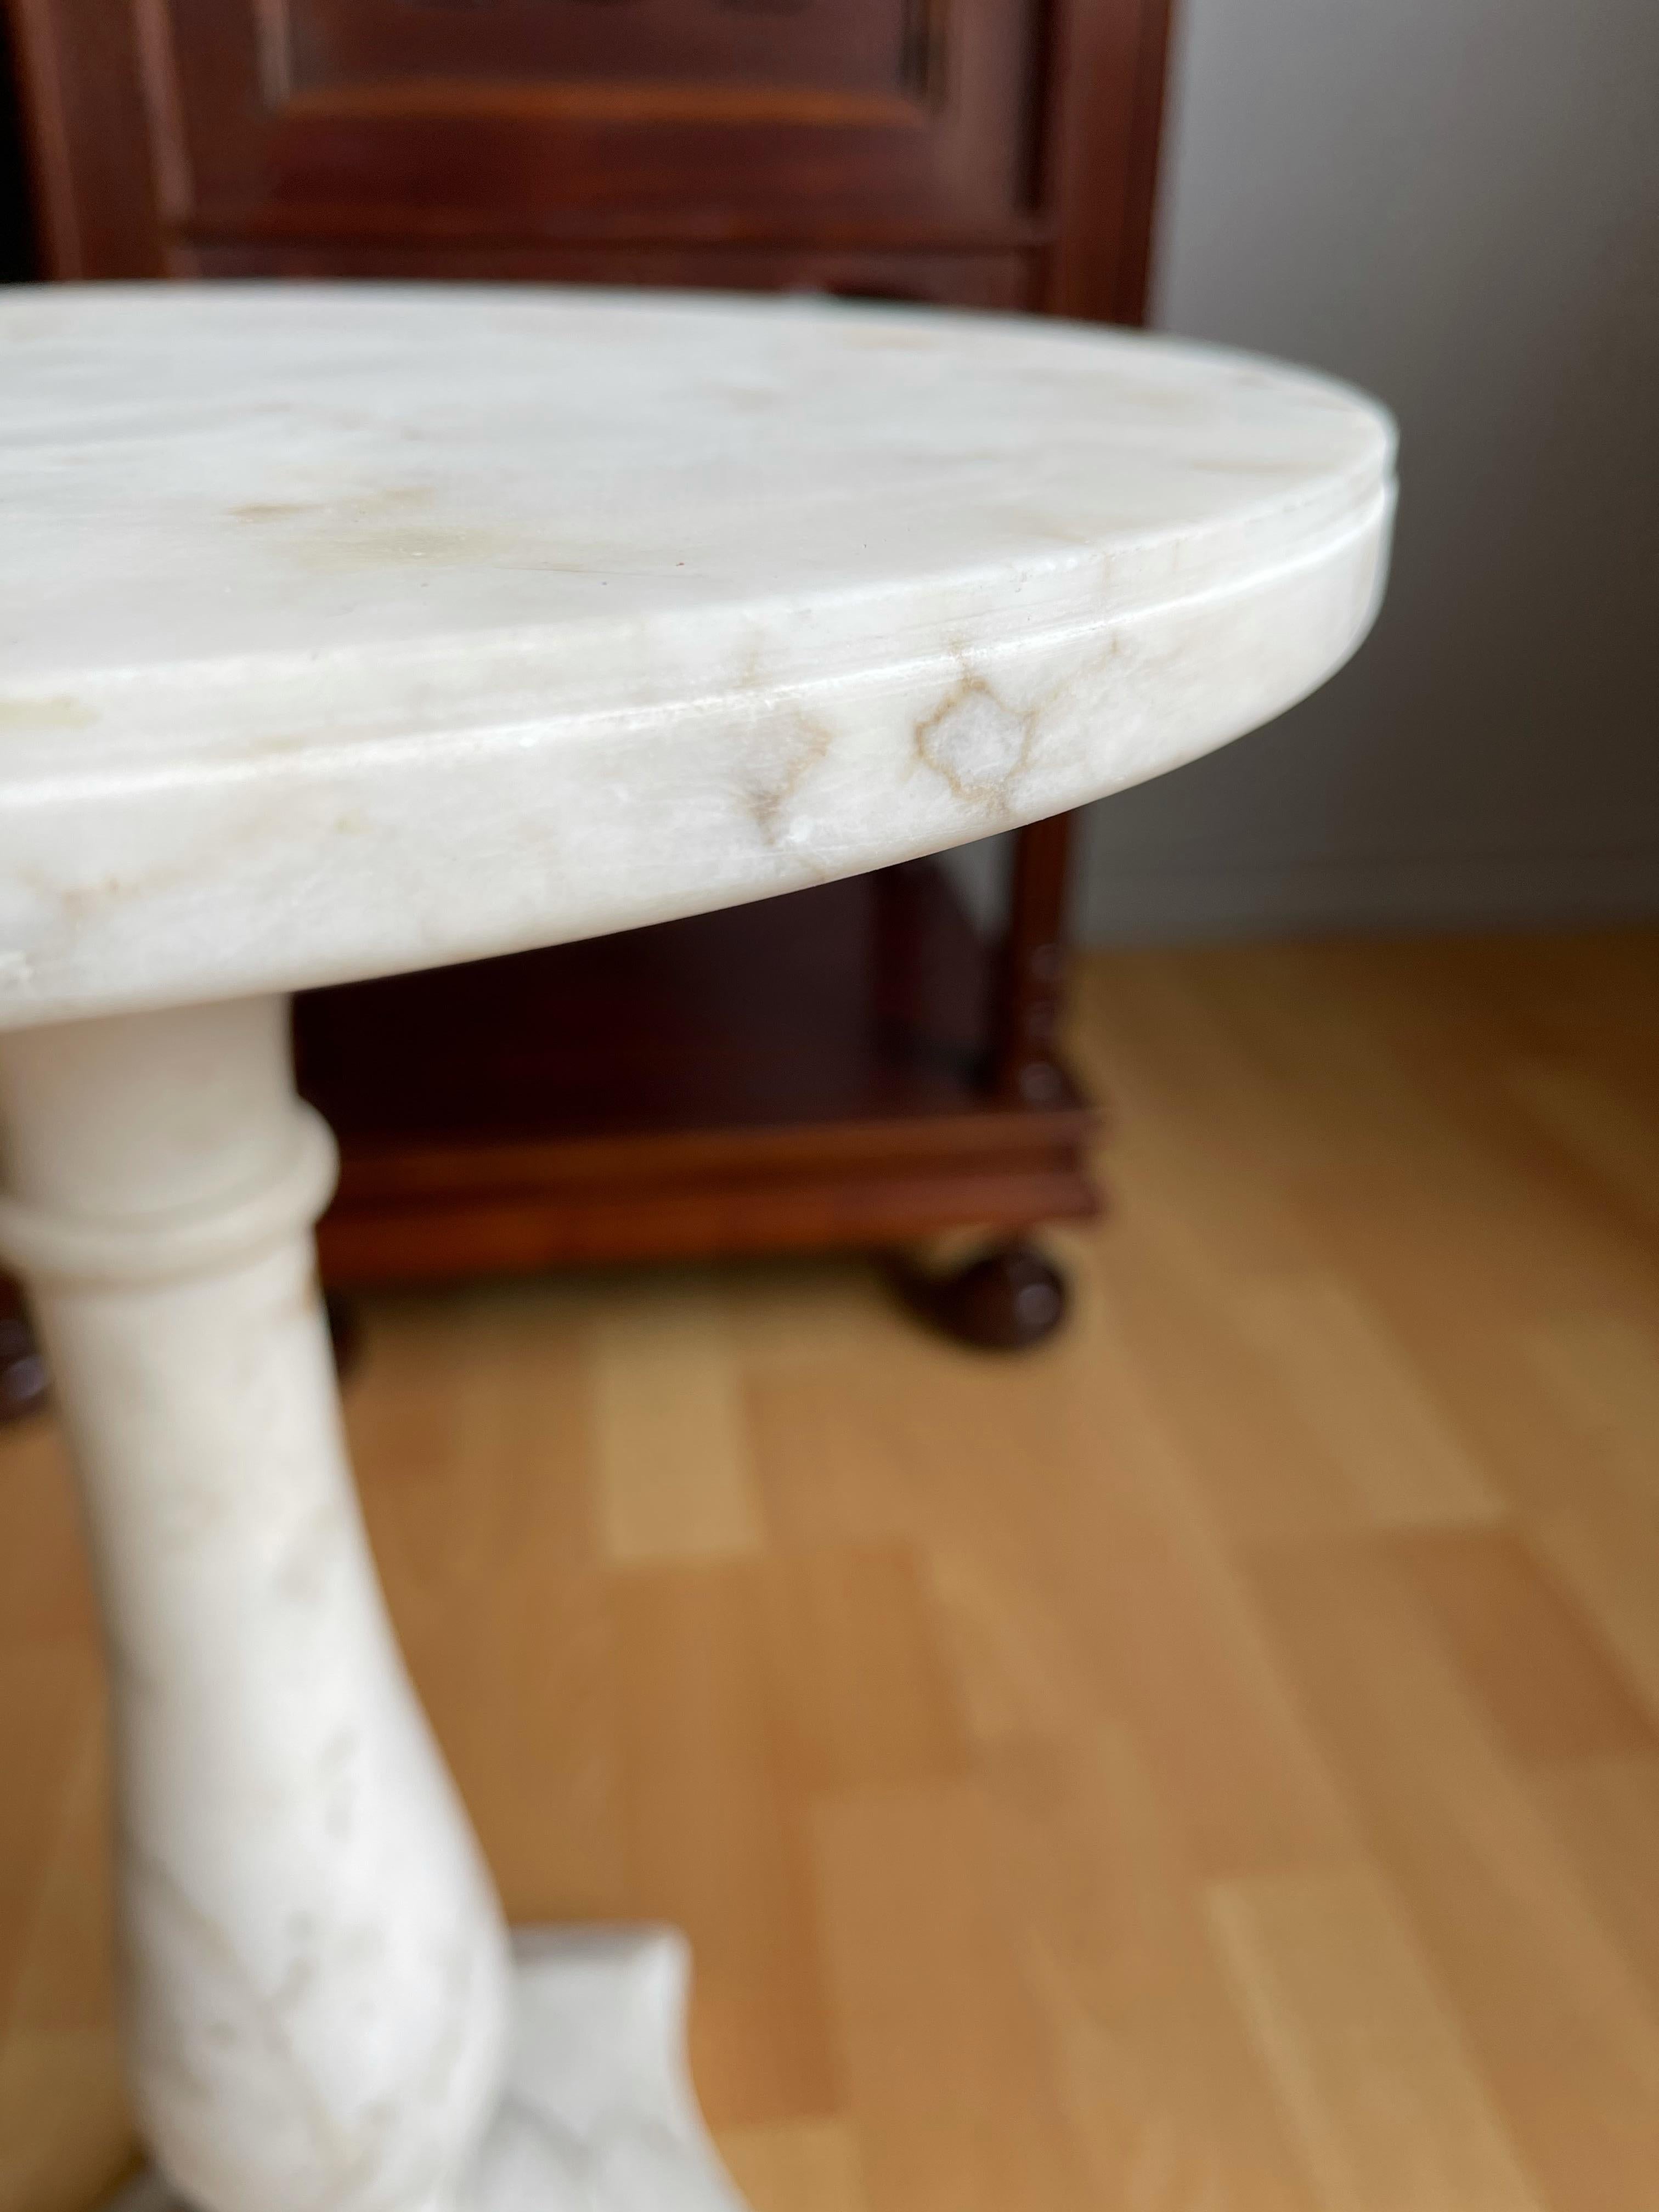 Italian Design Midcentury Modern White Carrara Marble Pedestal Stand / End Table For Sale 3